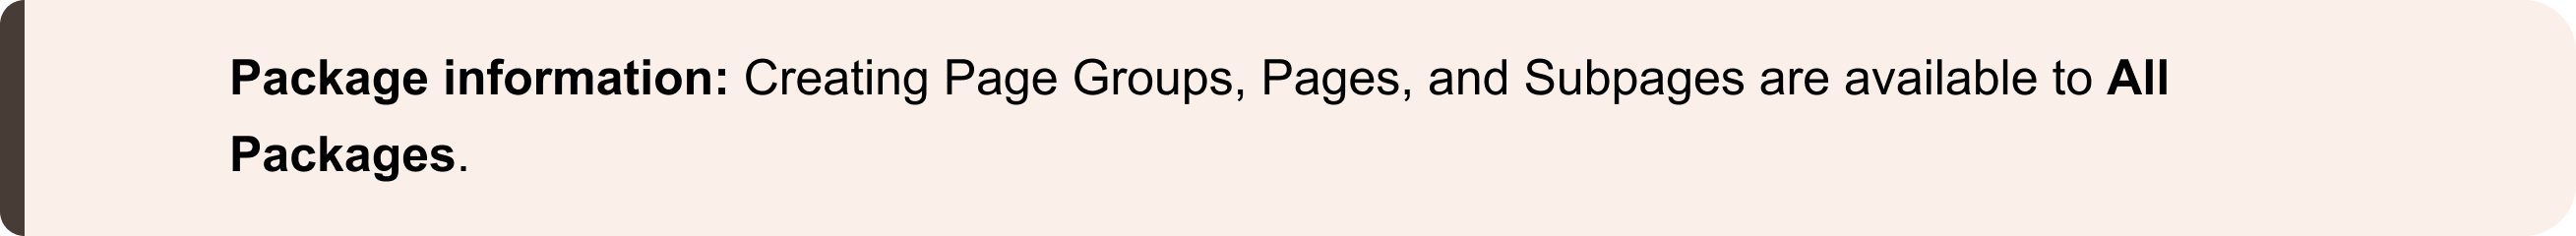 Learn_About_and_Get_started_with_Pages_1.png